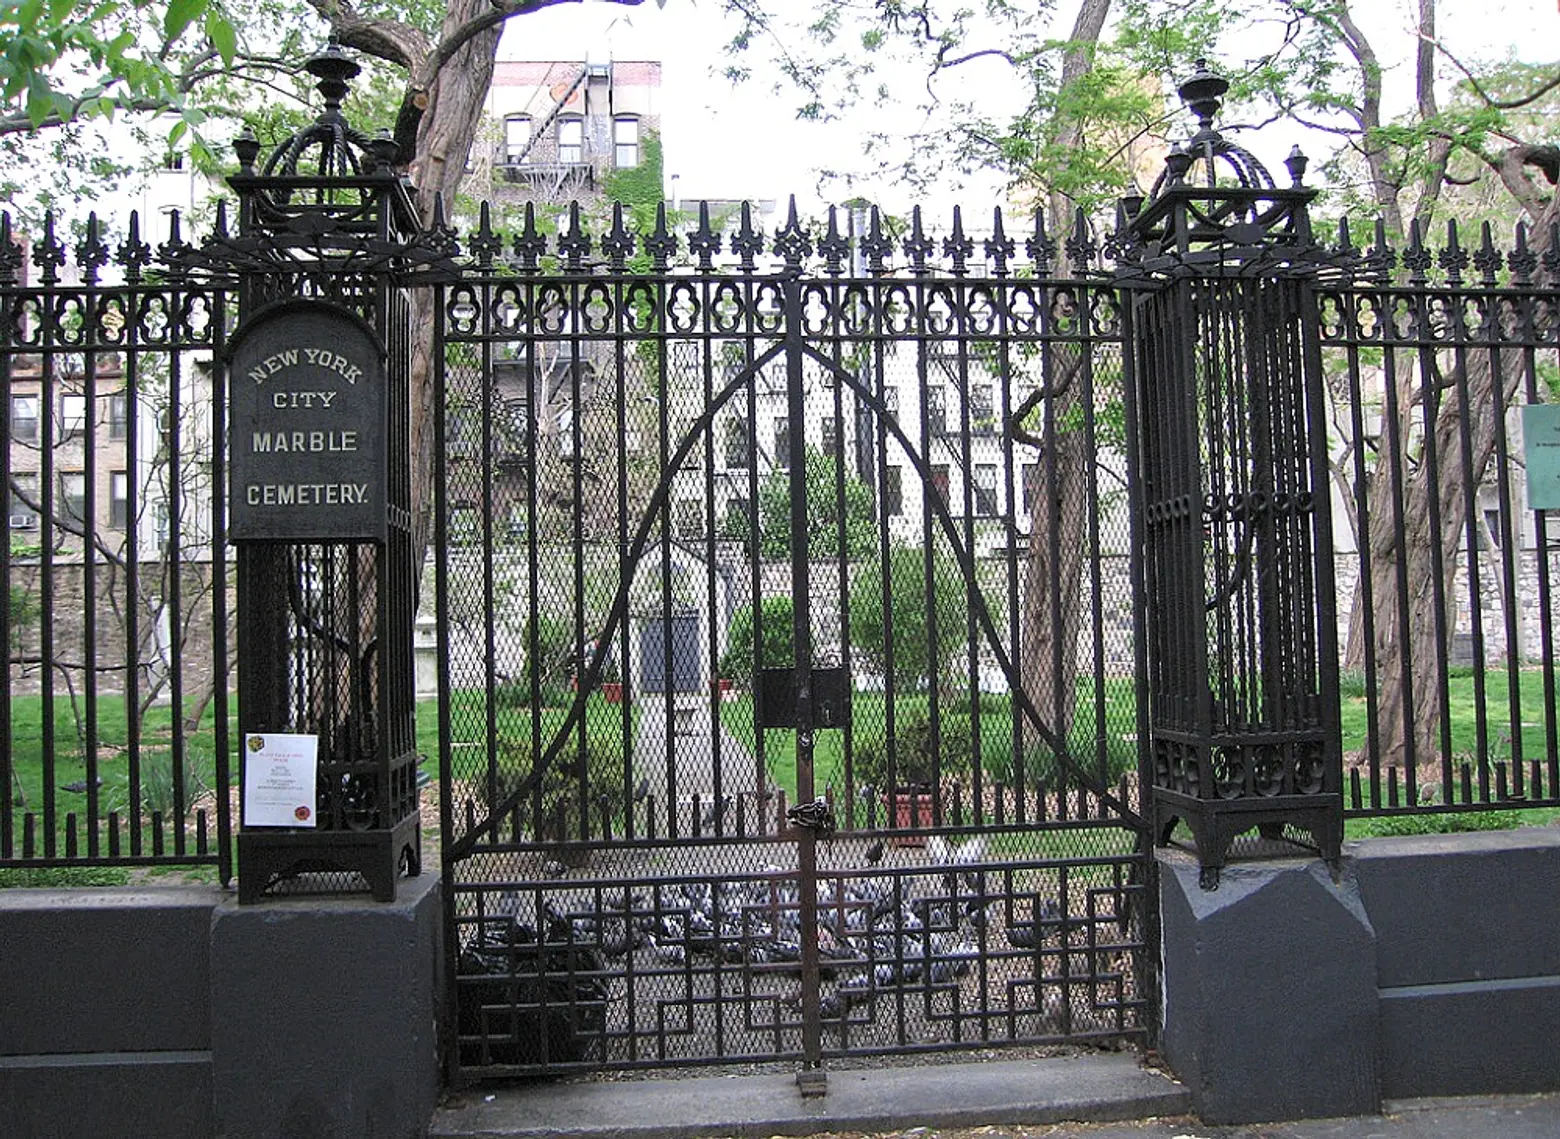 New York City Marble Cemetery, East Village history, historic NYC cemeteries